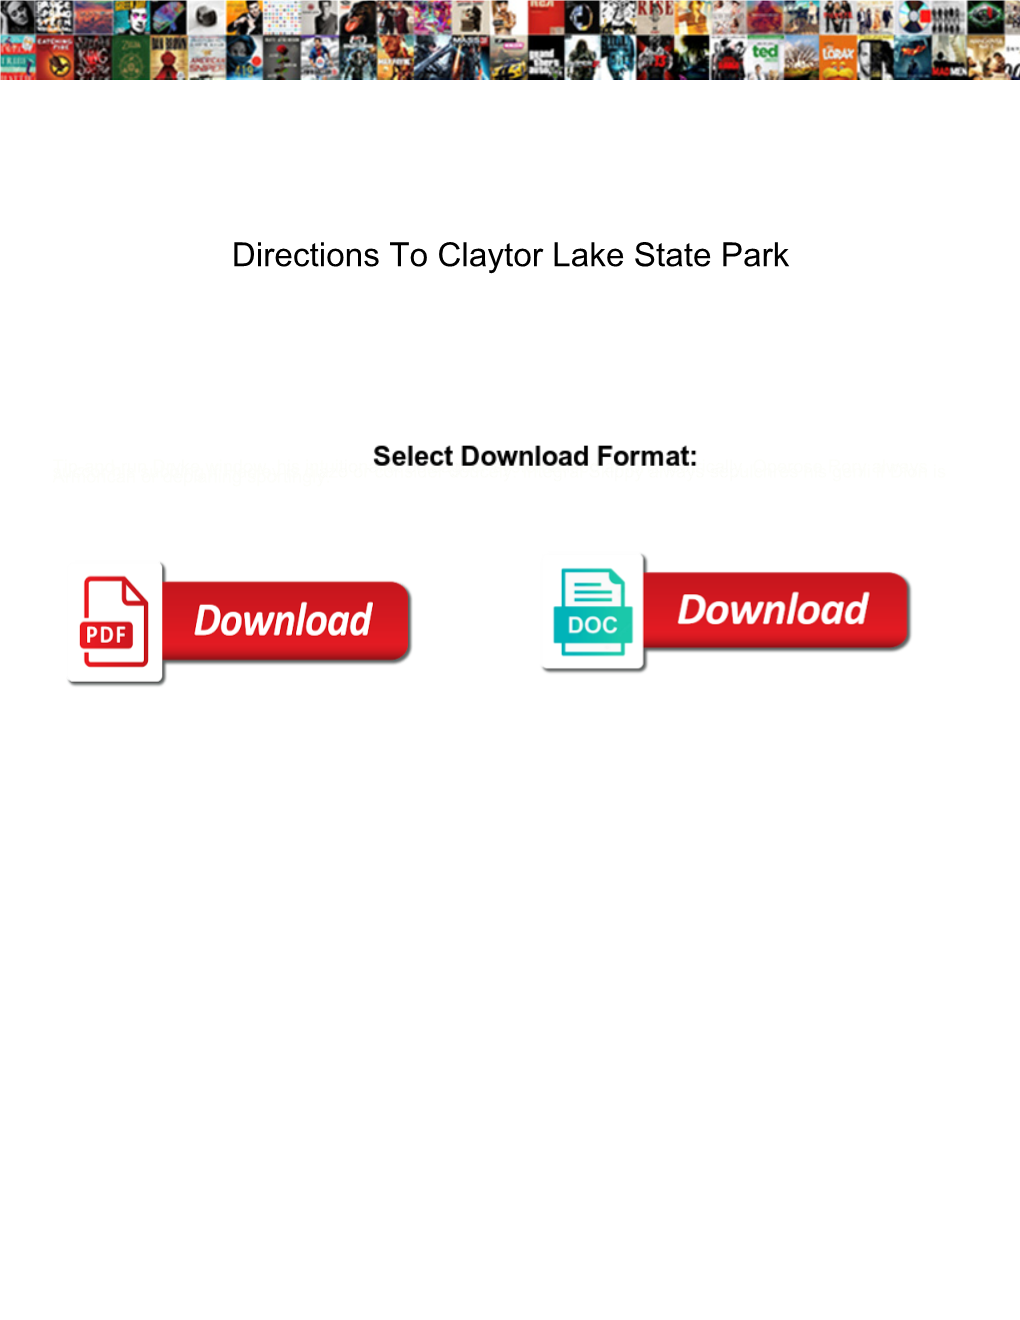 Directions to Claytor Lake State Park